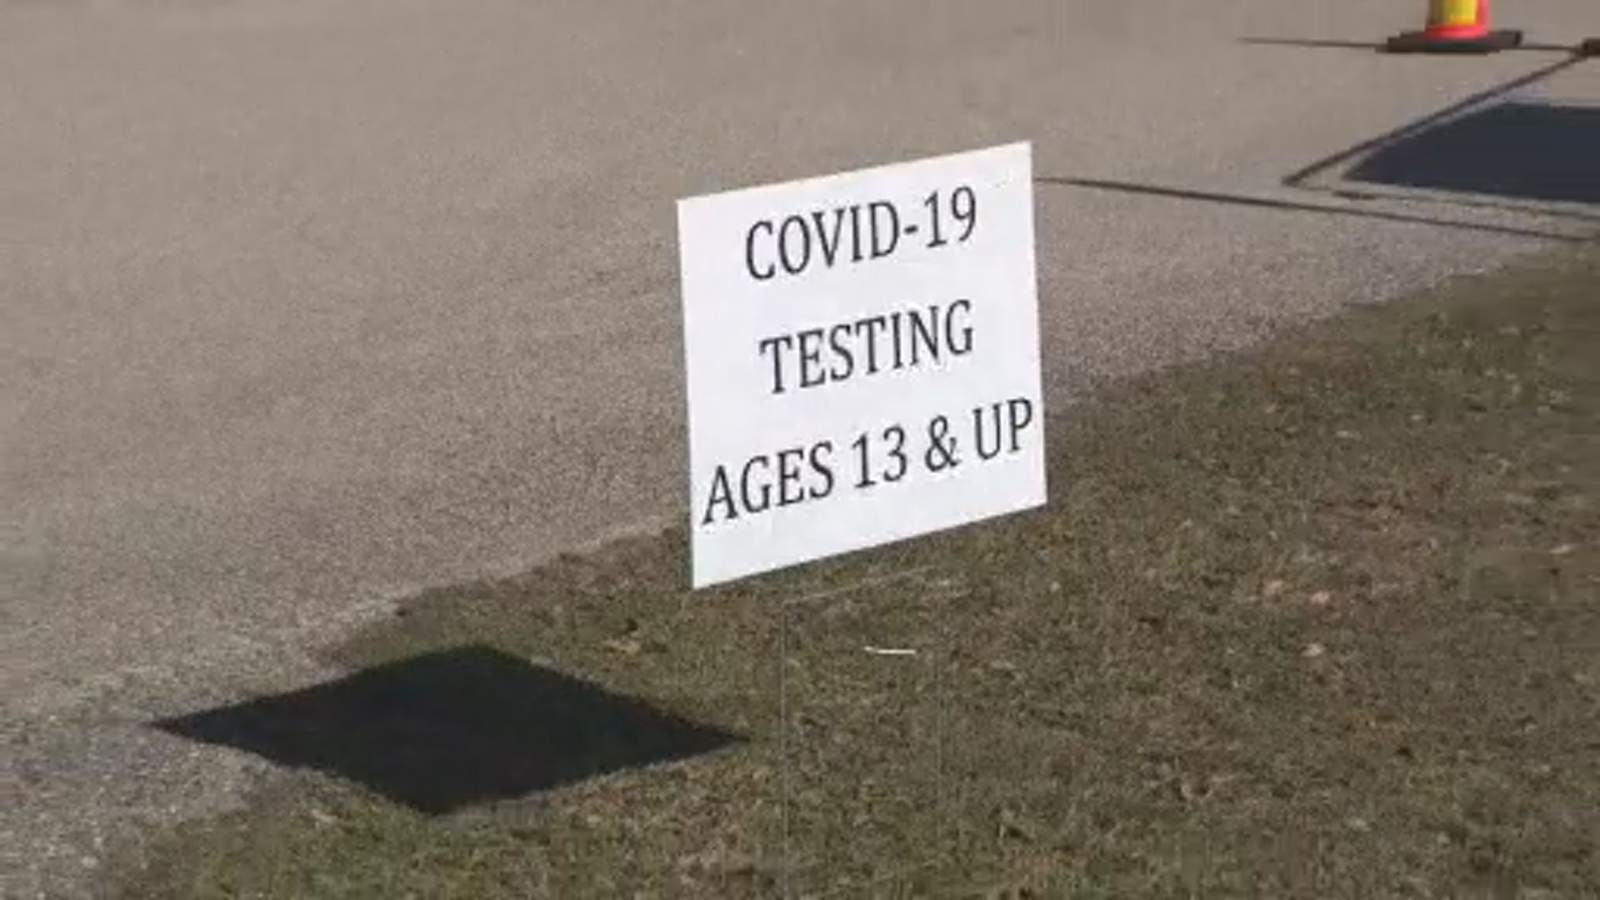 Health experts hoping to see increased traffic at testing sites after Thanksgiving holiday